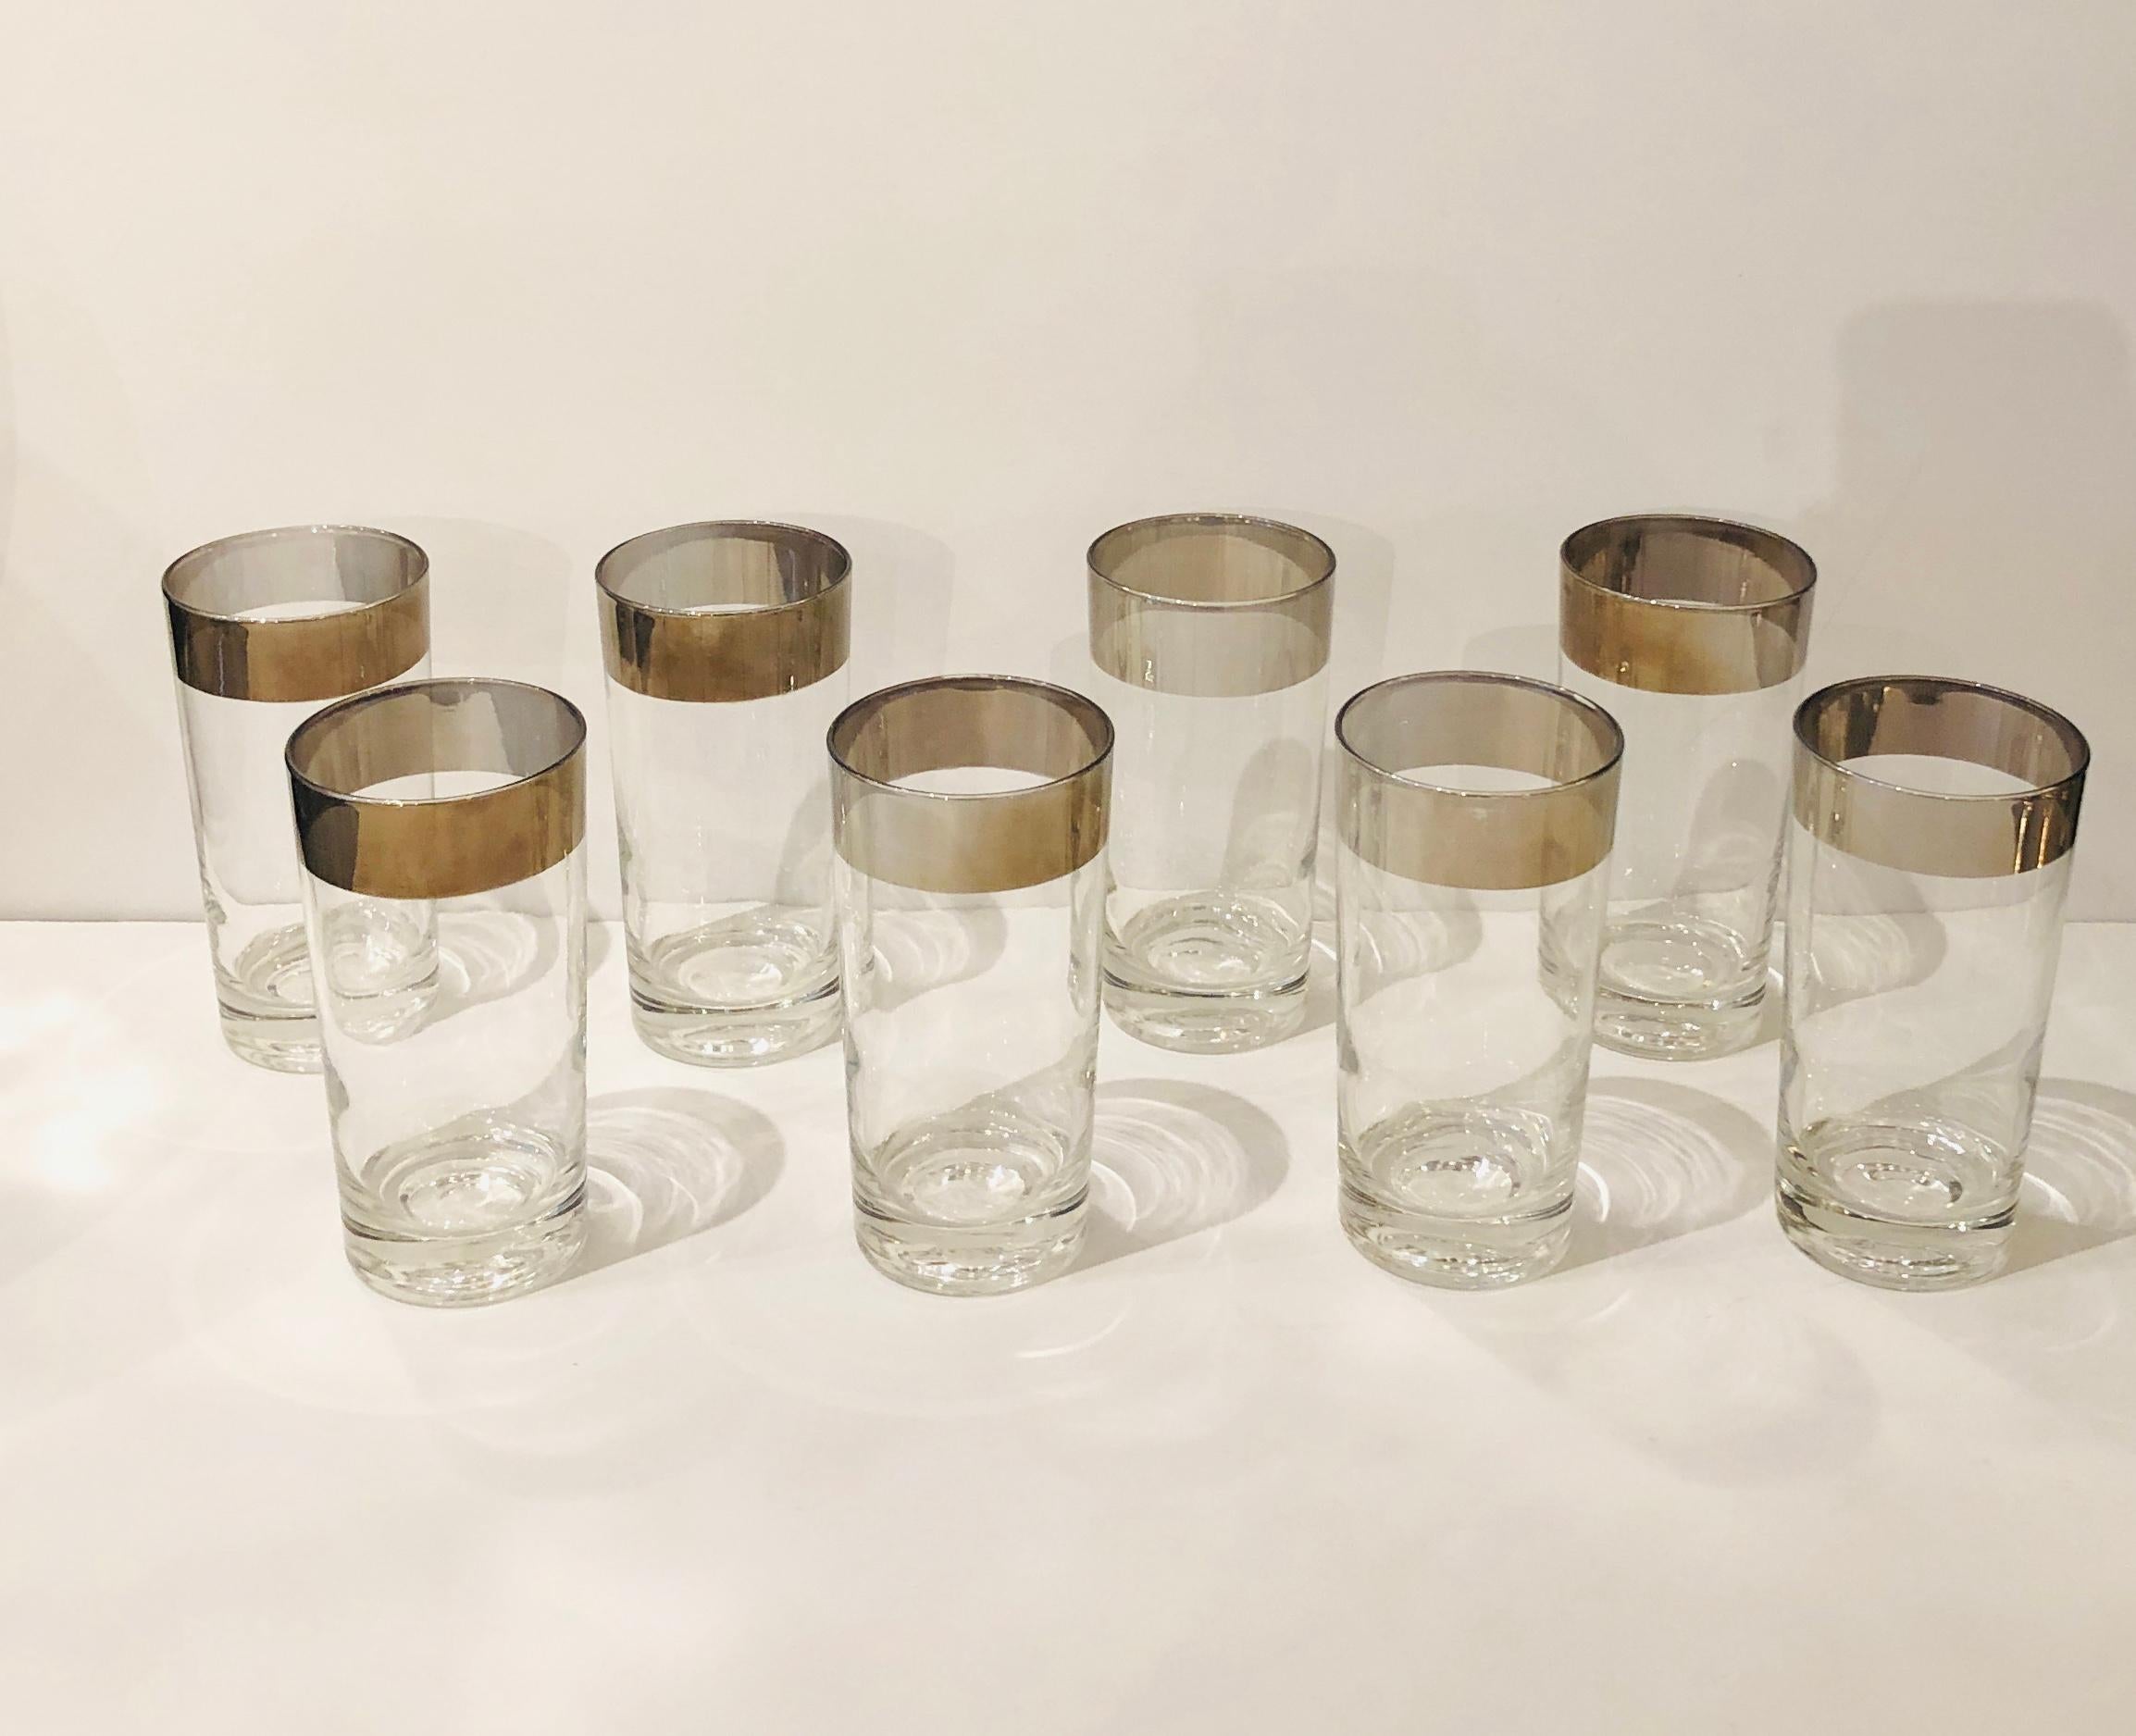 Offered are a set of 8 Mid-Century Modern Dorothy Thorpe clear with silver overlay band 